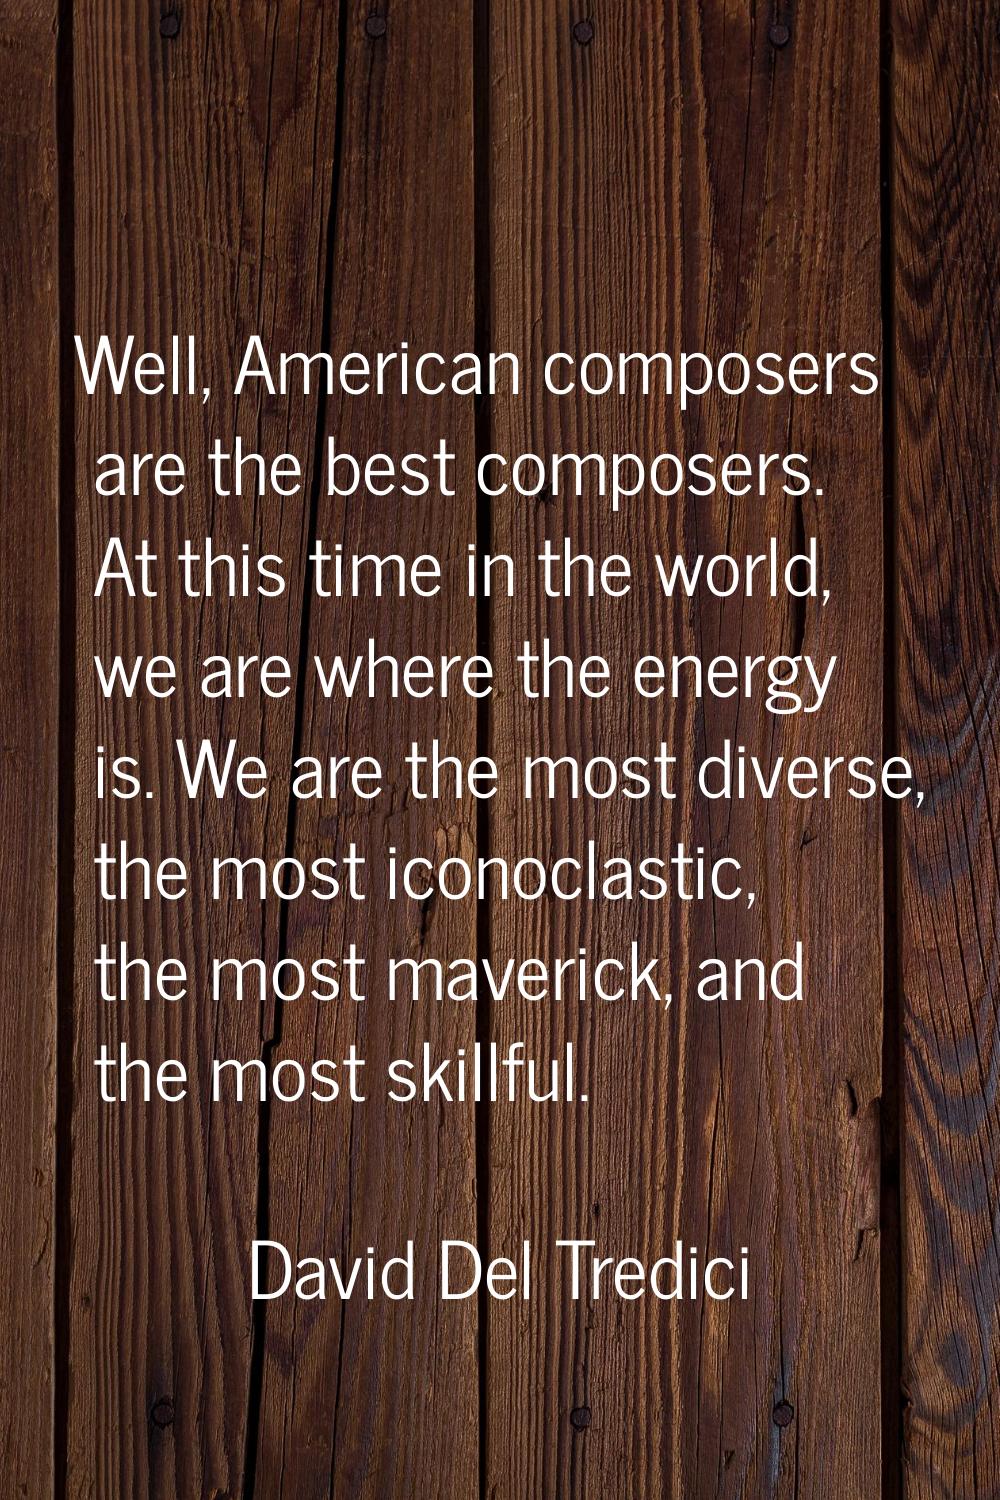 Well, American composers are the best composers. At this time in the world, we are where the energy